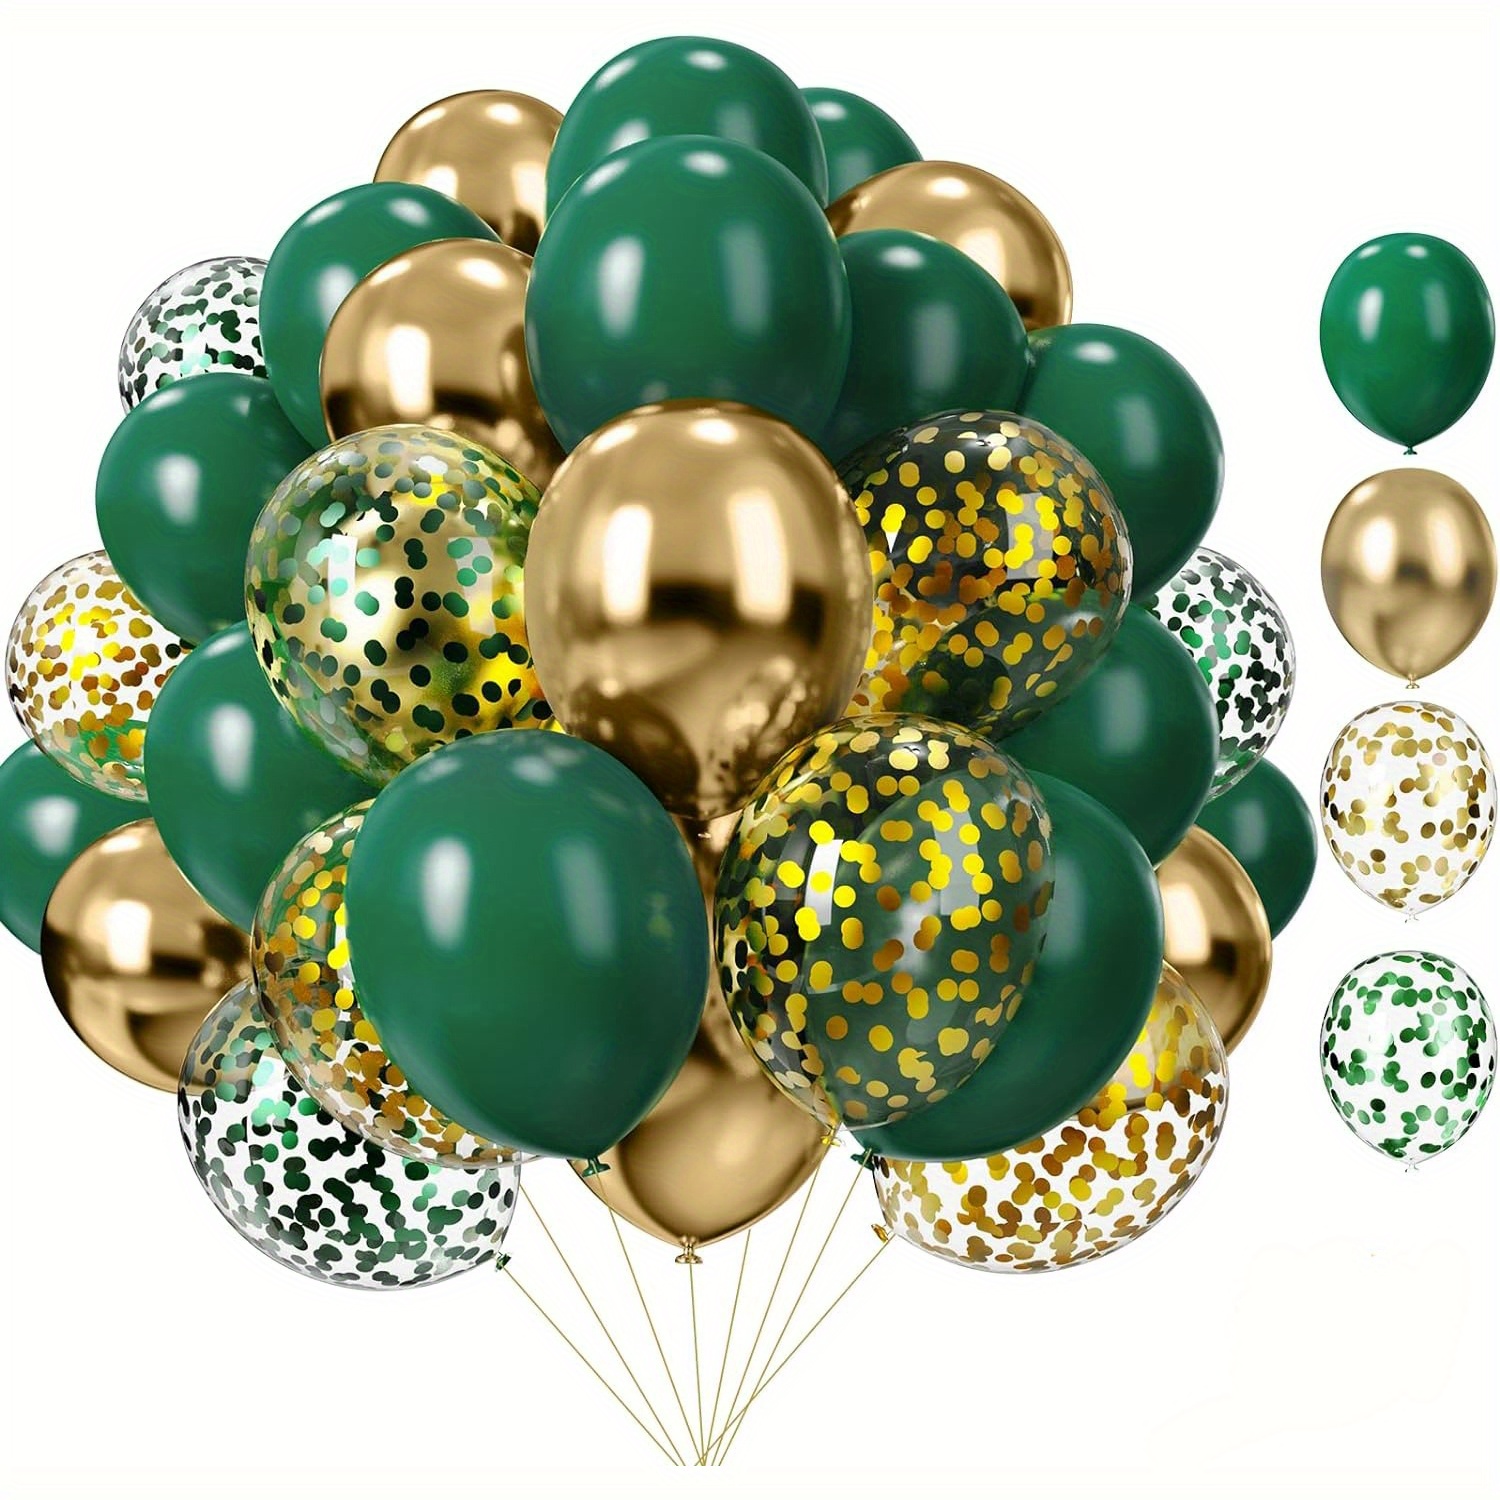 

41-piece Green & Gold Balloon Set - 12" & 10" Latex Balloons For Birthday, St. Patrick's Day, Gender Reveal, Graduation, Jungle Party Decorations